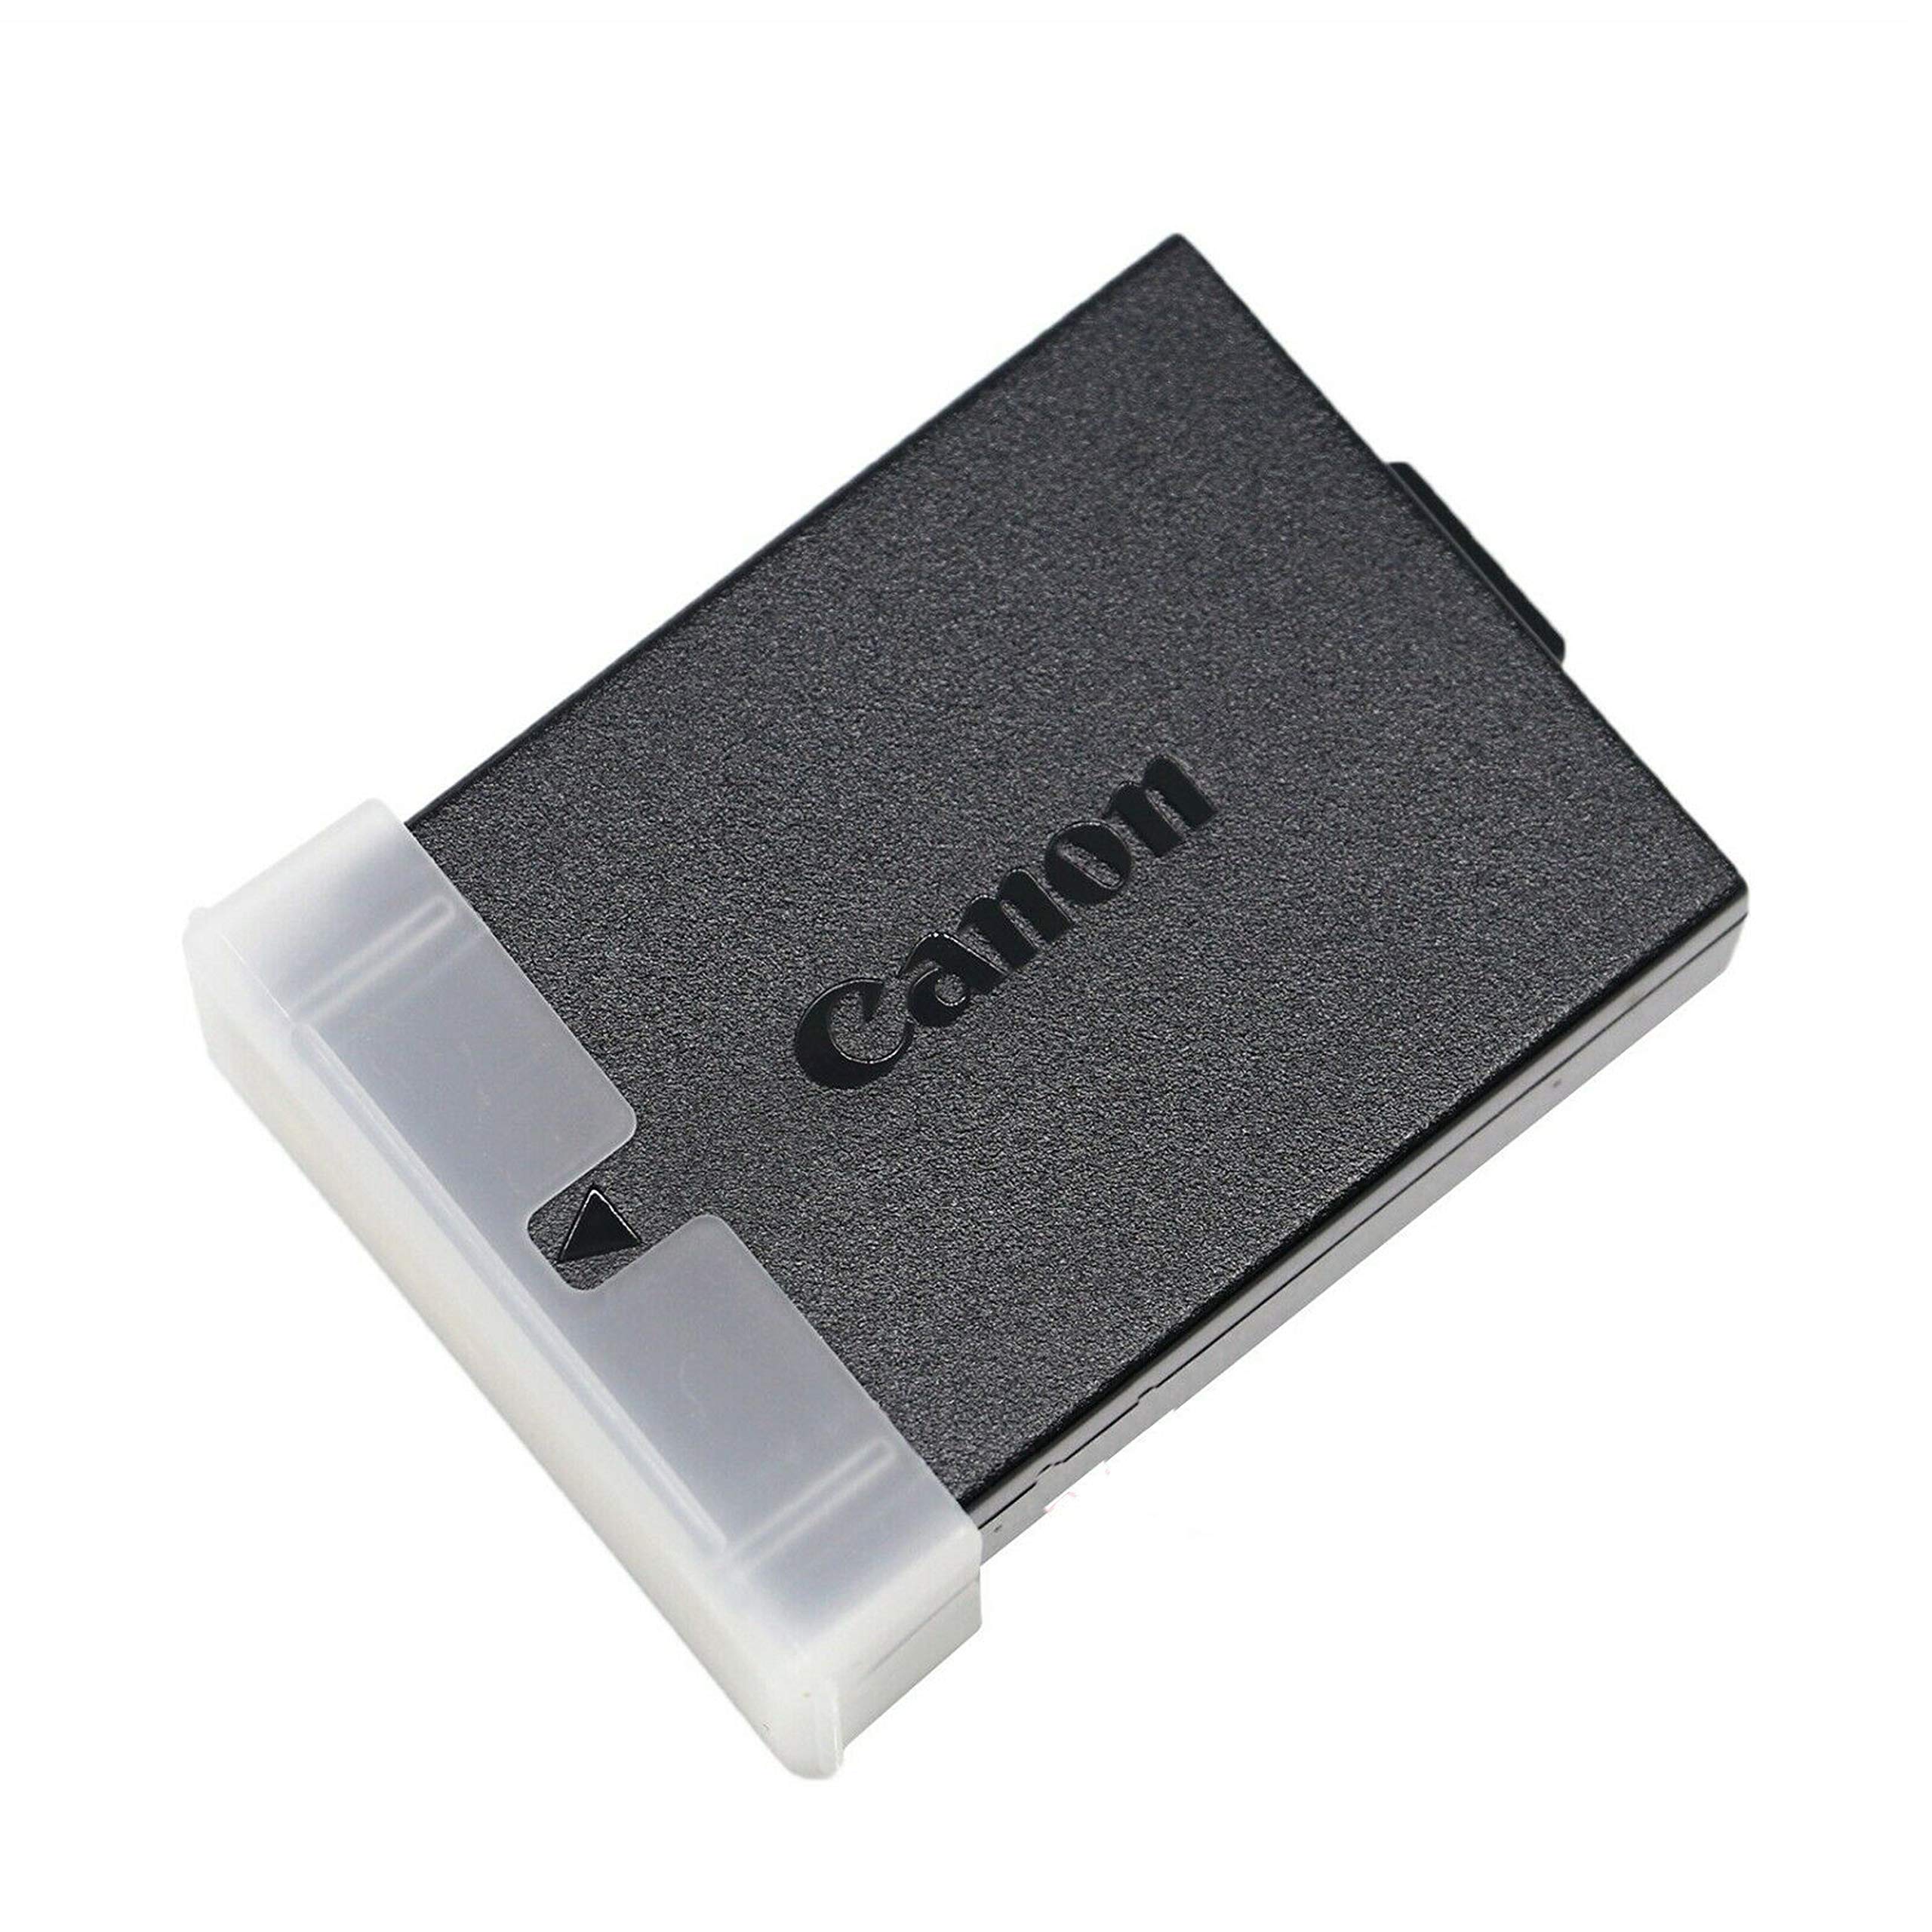 Canon LP-E12 Lithium-Ion Battery Pack for Canon Eos EOS M M2 M10 M50 M100 M50 Mark II M200 Rebel SL1 Camera(Bulk Packaging)